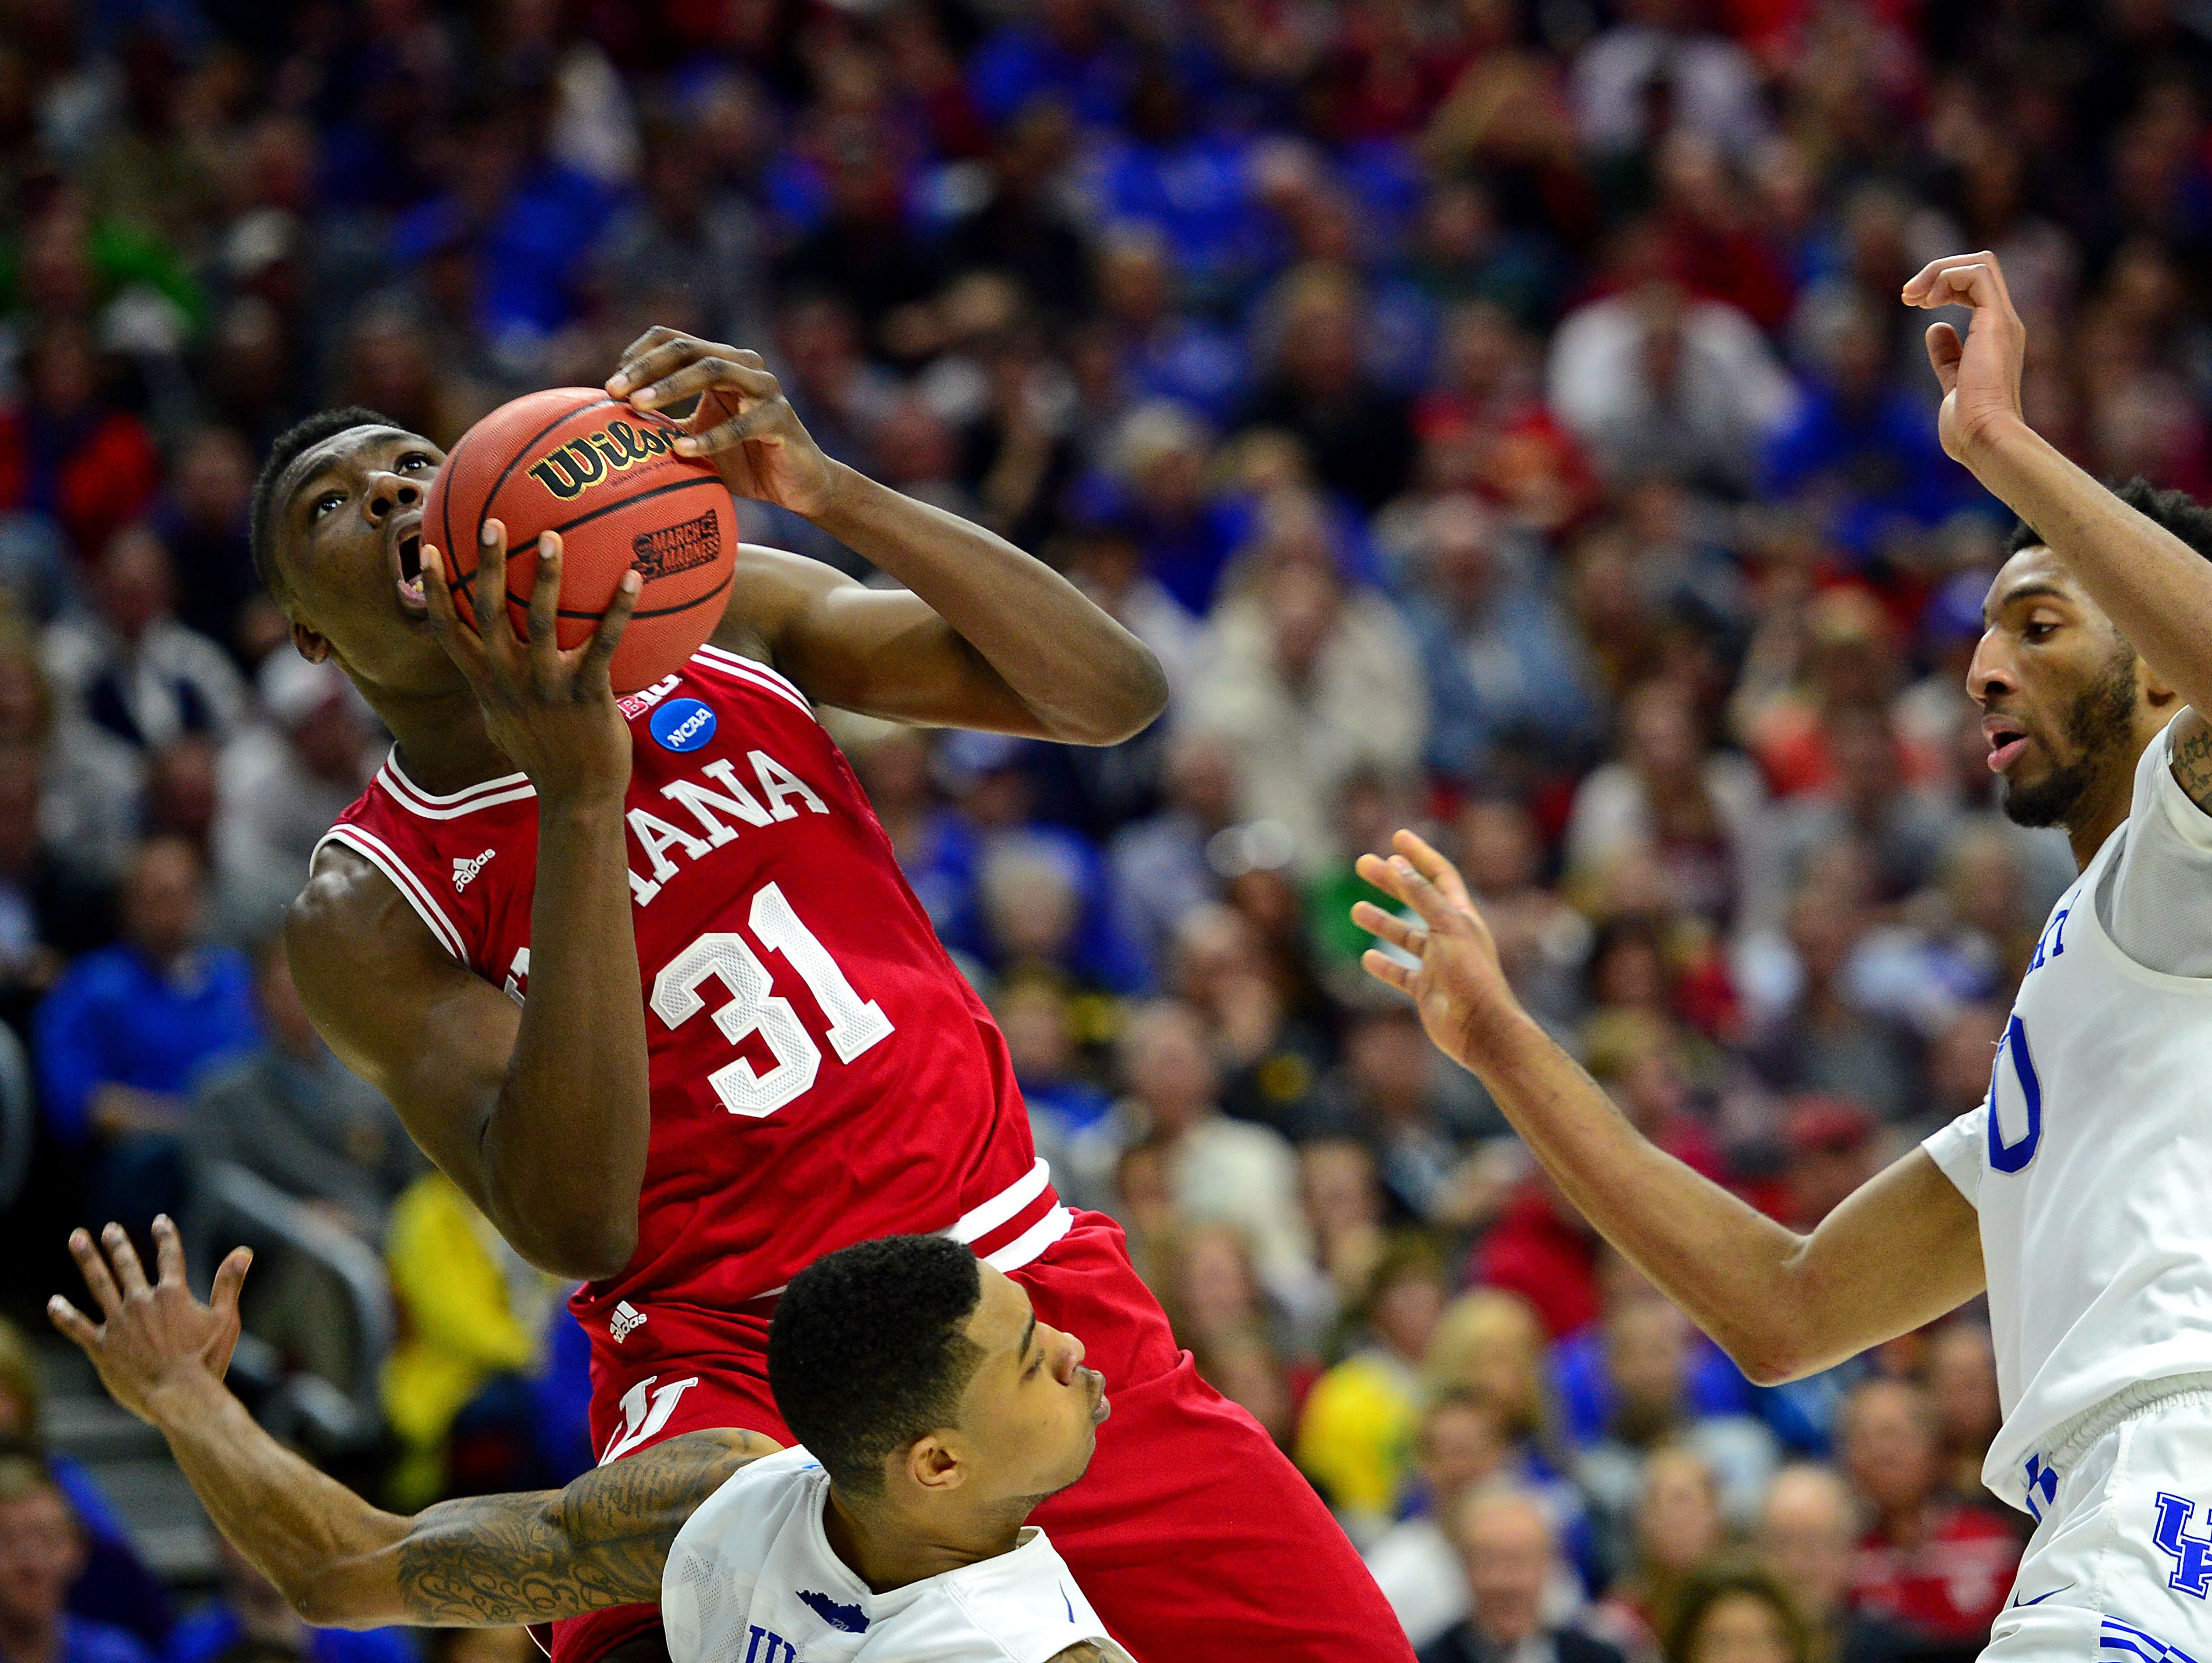 Indiana Hoosiers center Thomas Bryant (31) drives to the basket against Kentucky Wildcats guard Tyler Ulis (3) and forward Marcus Lee (00).